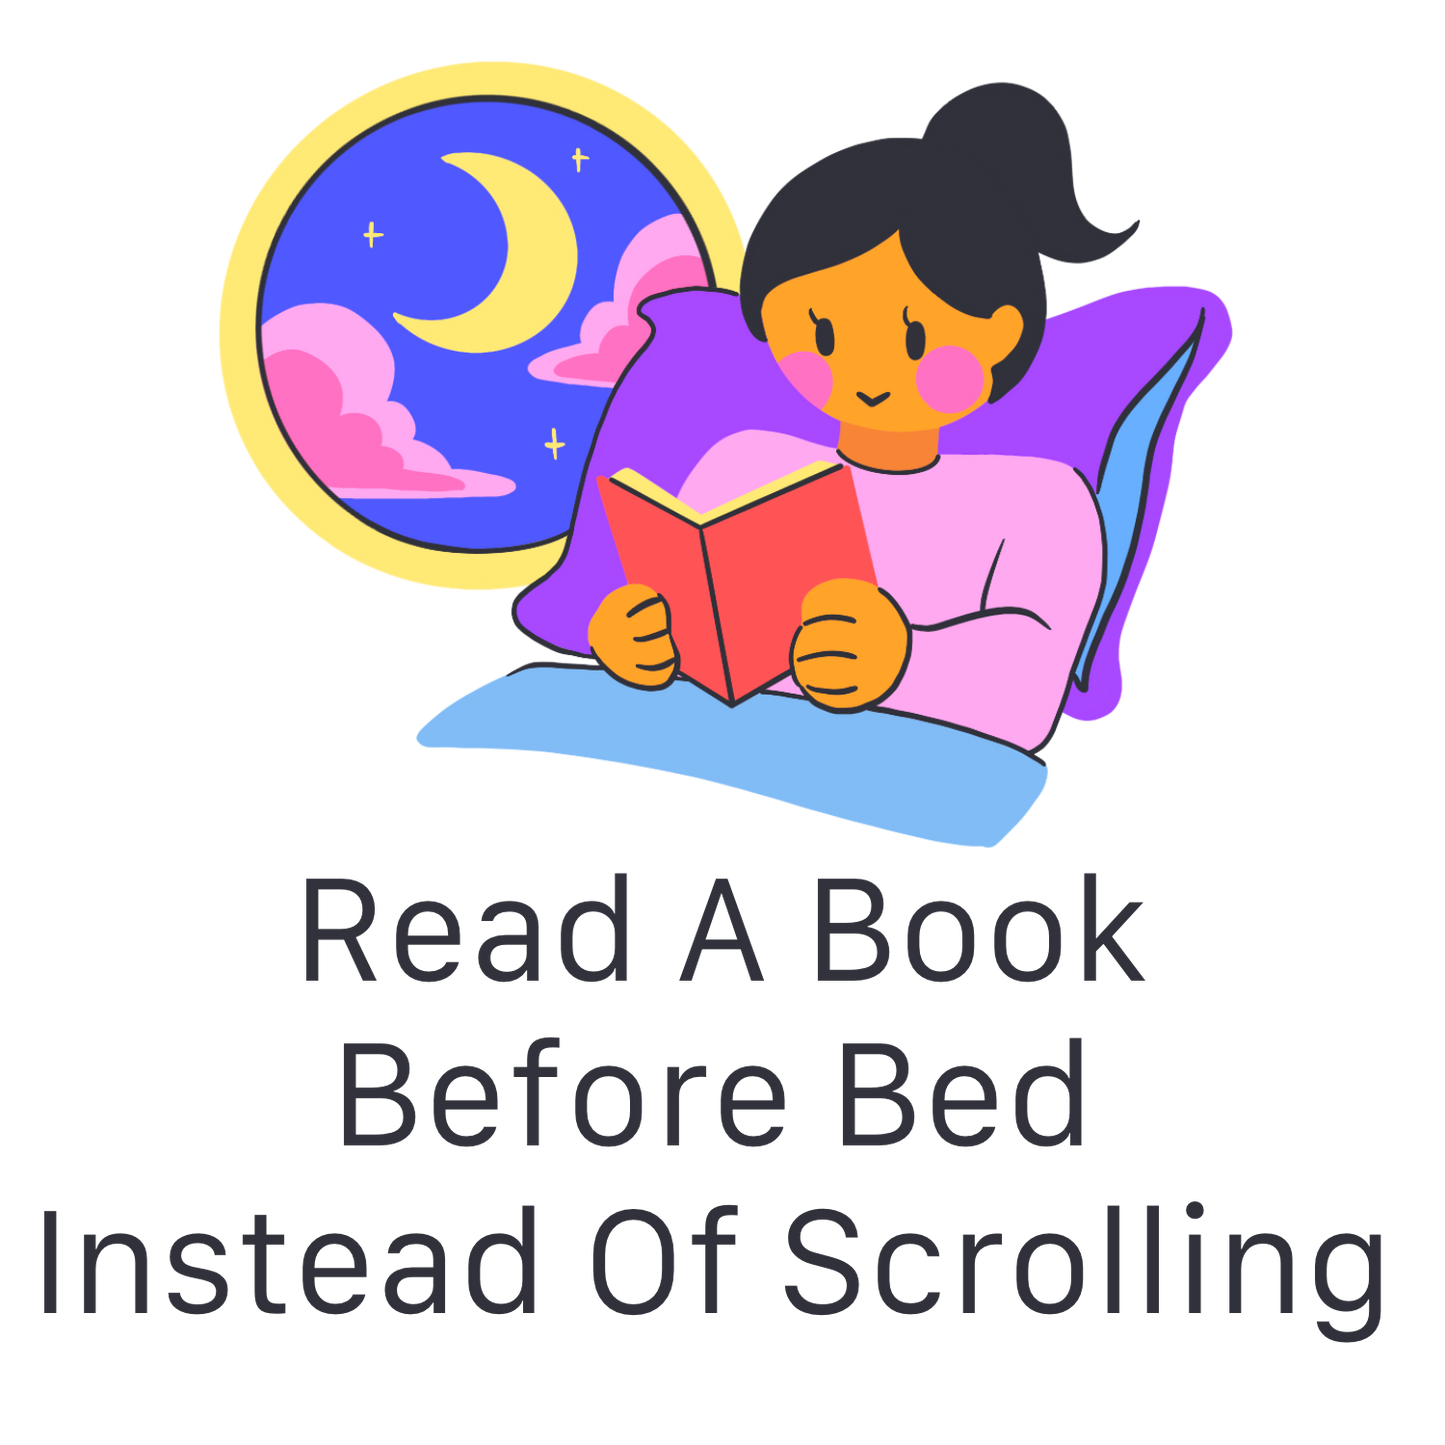 Inspirational Quote Read A book Before Bed Instead Of Scrolling Motivational Sticker Vinyl Decal Motivation Stickers- 5" Vinyl Sticker Waterproof